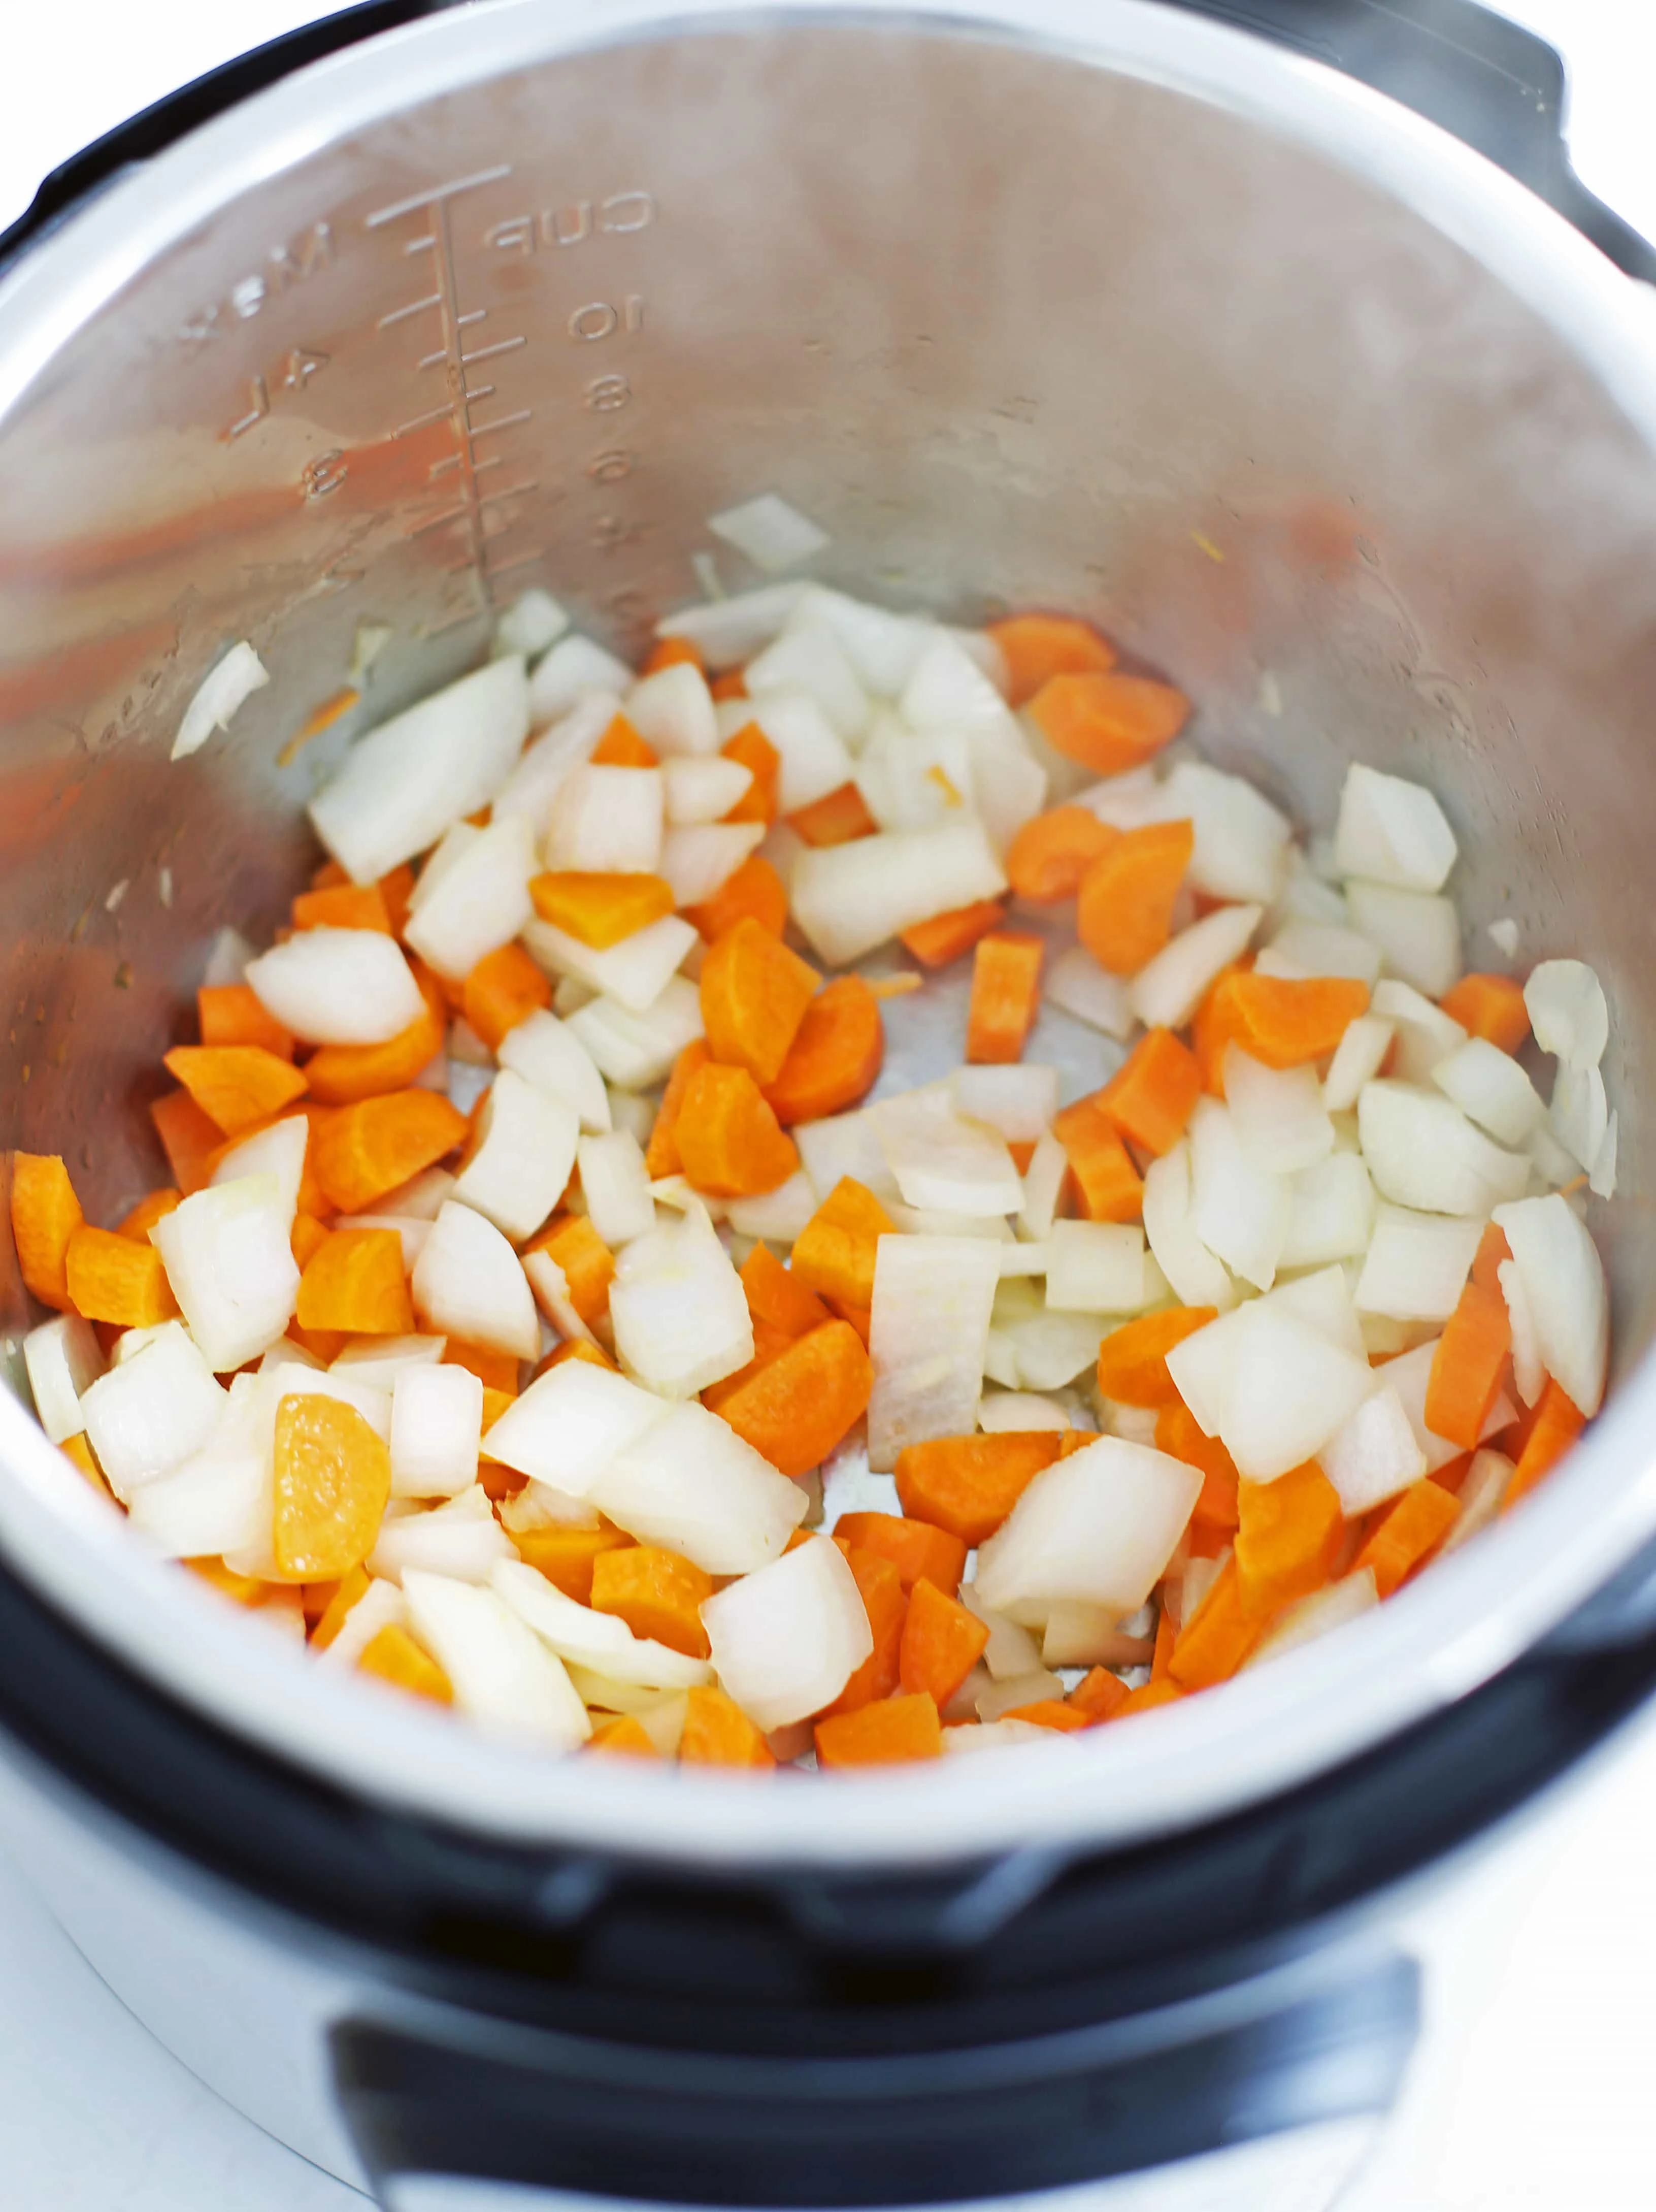 Sauteed onions and carrots in the Instant Pot.